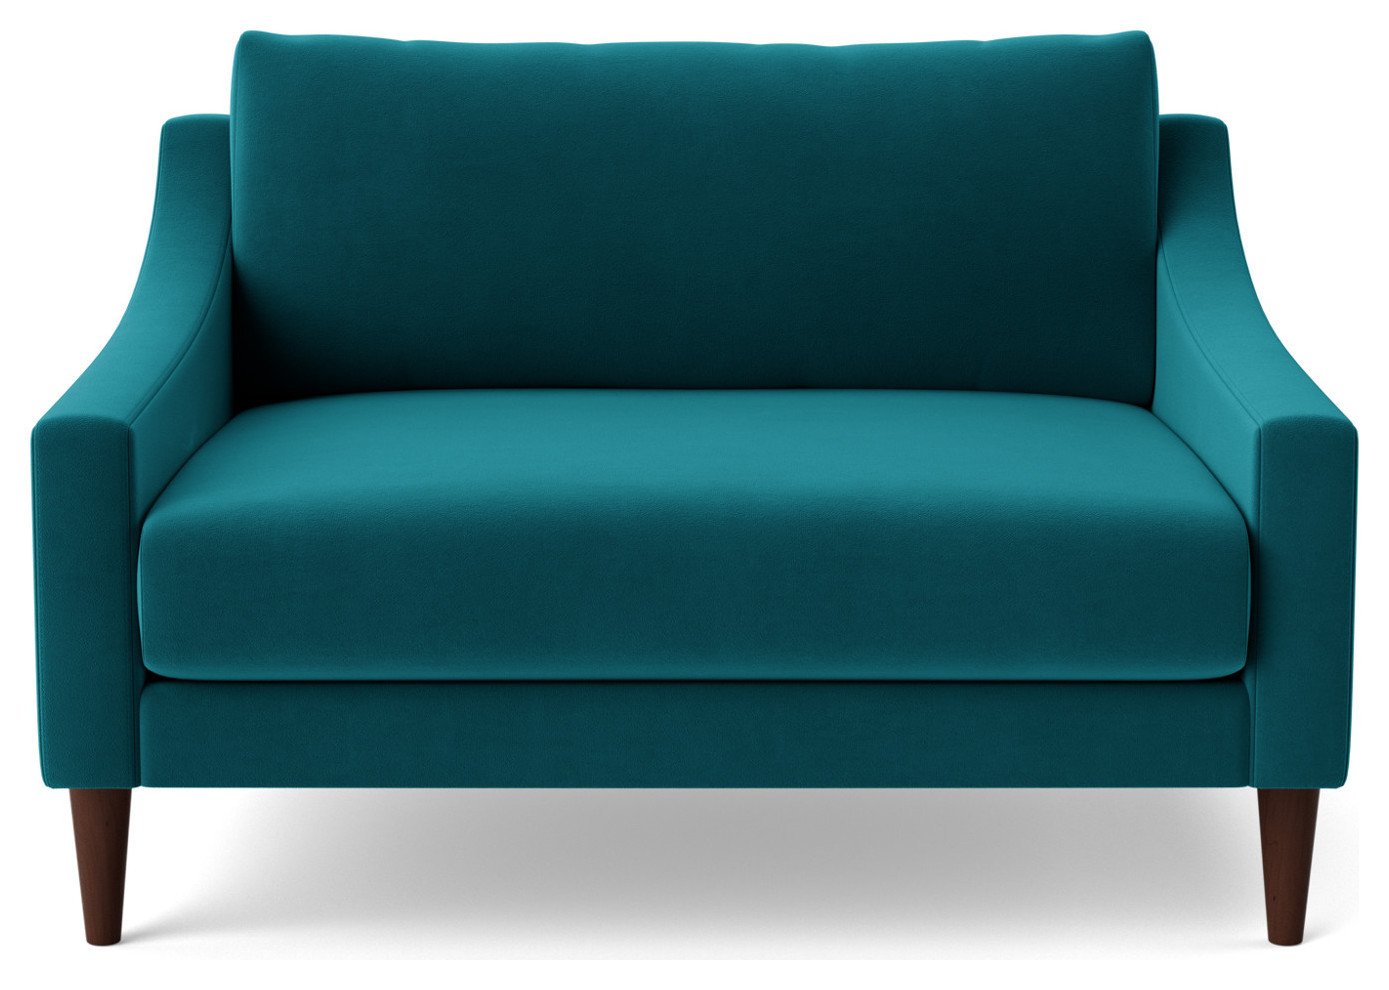 Swoon Turin Velvet Cuddle Chair - Kingfisher Blue